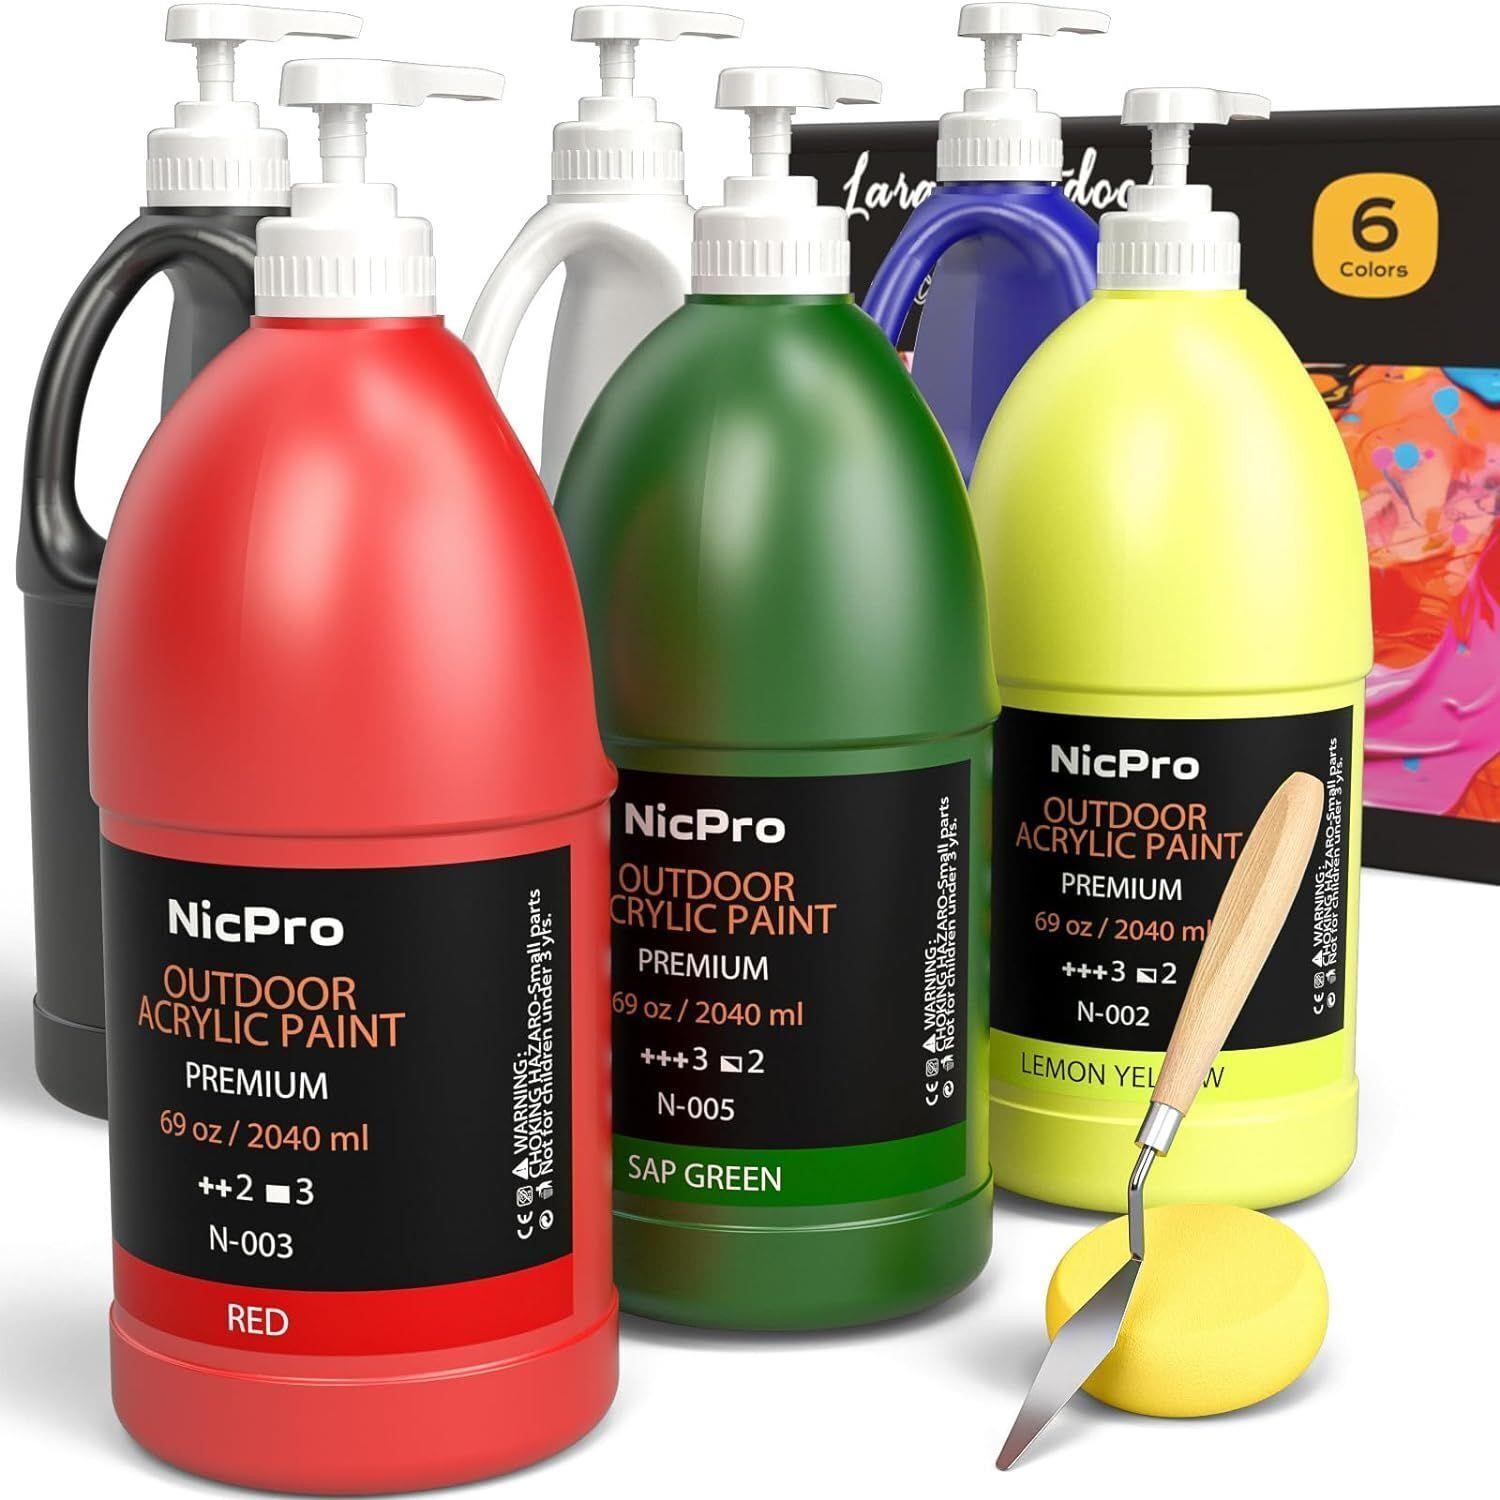 Nicpro 6 Colors Large Outdoor Acrylic Paint Set